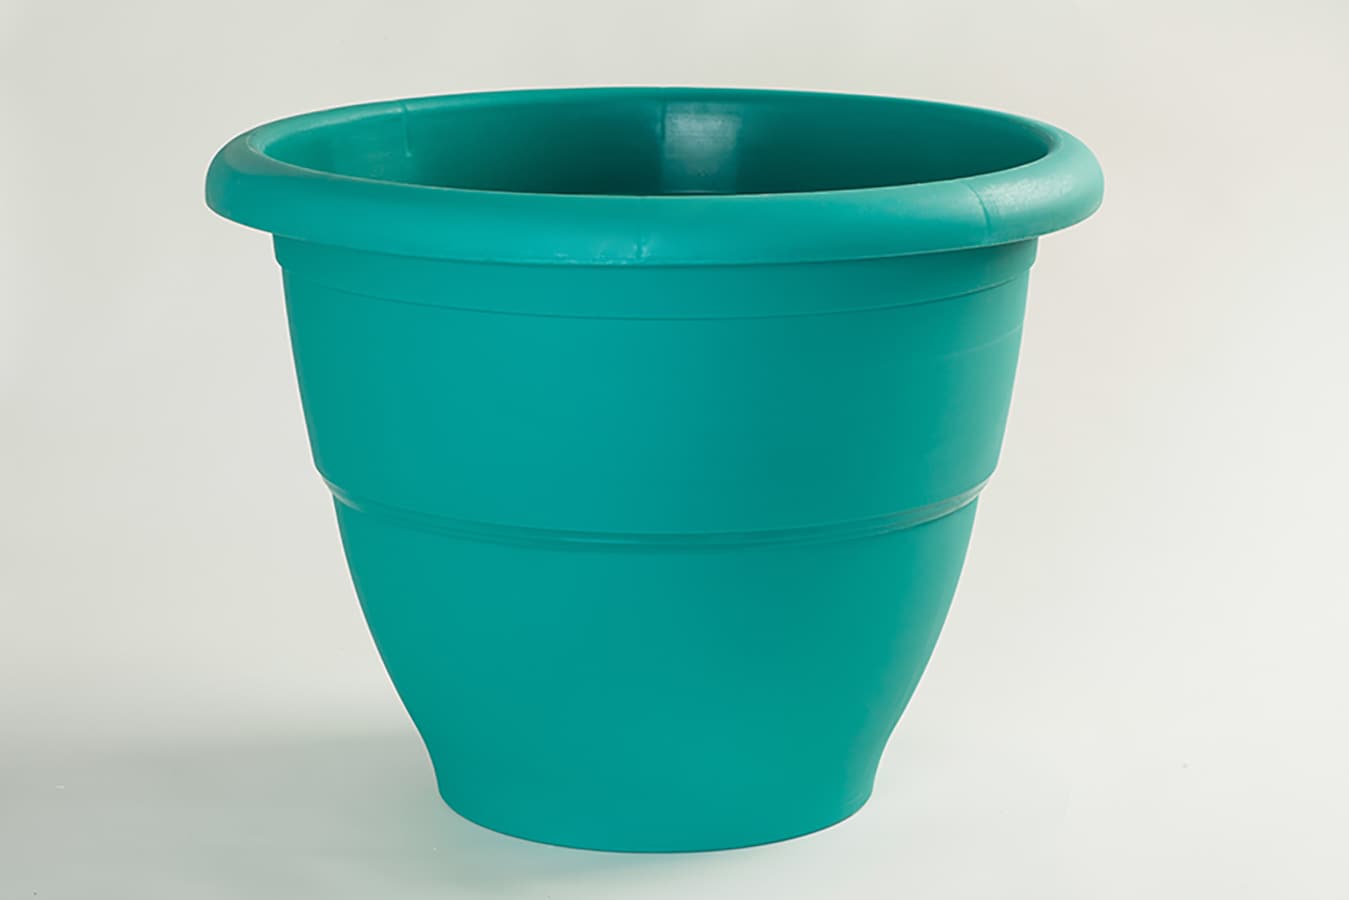 Garden Treasures 20.5-in W x H Teal Planter at